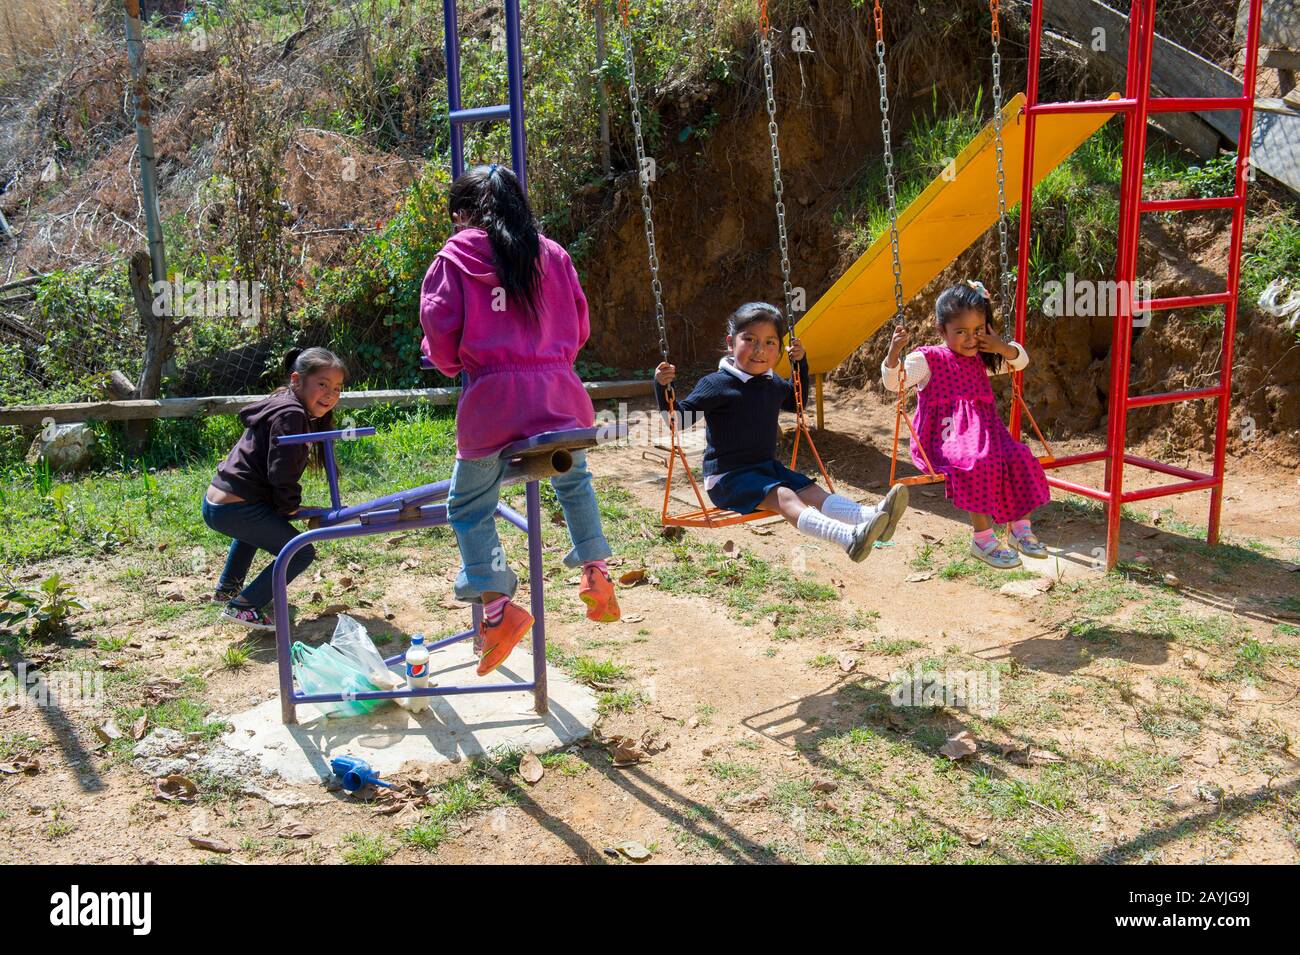 Girls from the kindergarten class on the swing set and teeter totter seesaw of playground of the school in the Mixtec village of San Juan Contreras ne Stock Photo